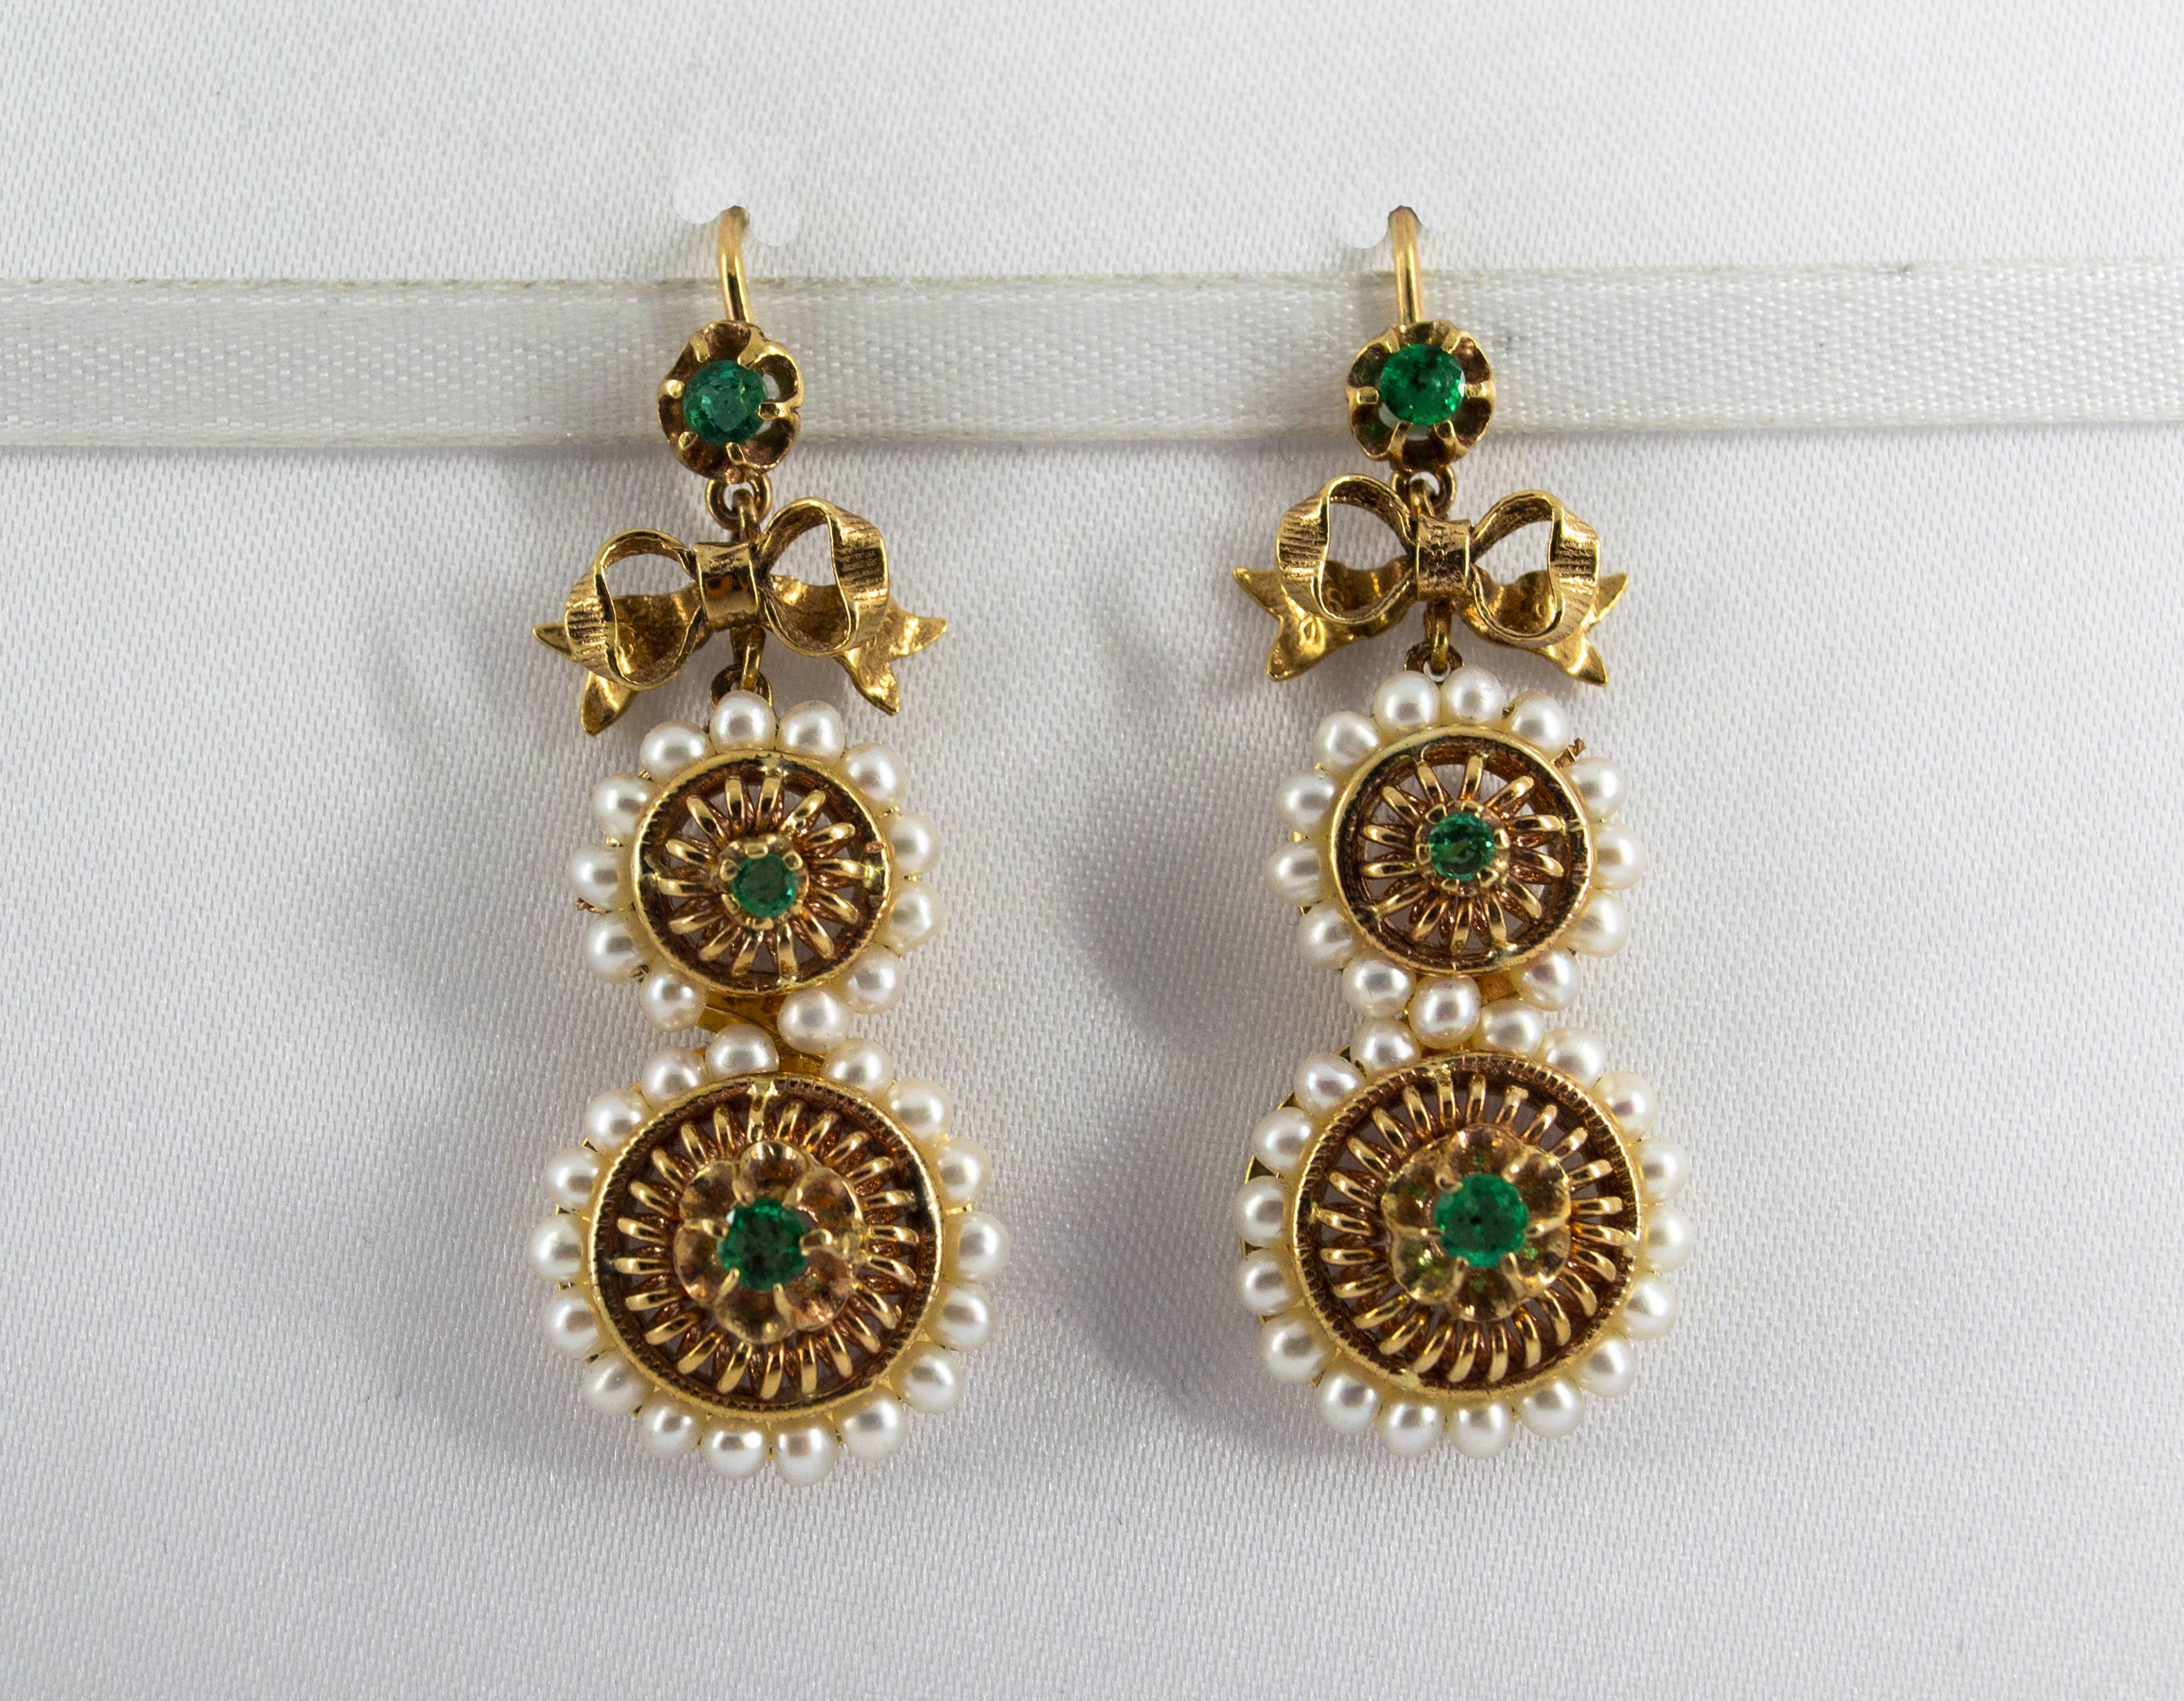 These  Earrings are made of 9K Yellow Gold.
These Earrings have 1.00 Carat of Emeralds.
These Earrings have also Micro Pearls.
We're a workshop so every piece is handmade, customizable and resizable.